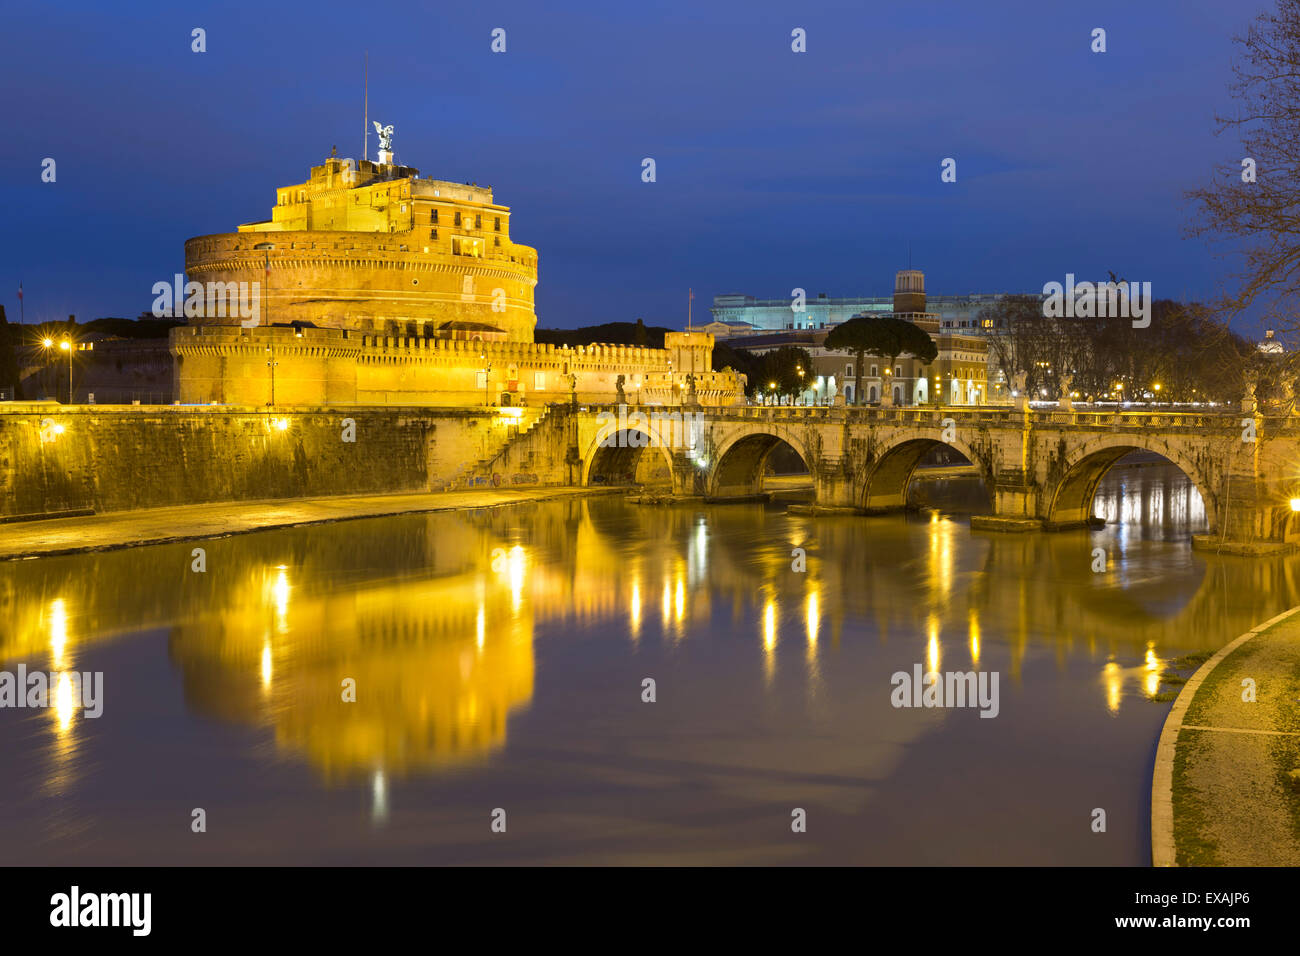 Castel Sant'Angelo and Ponte Sant'Angelo on the River Tiber at night, Rome, Lazio, Italy, Europe Stock Photo